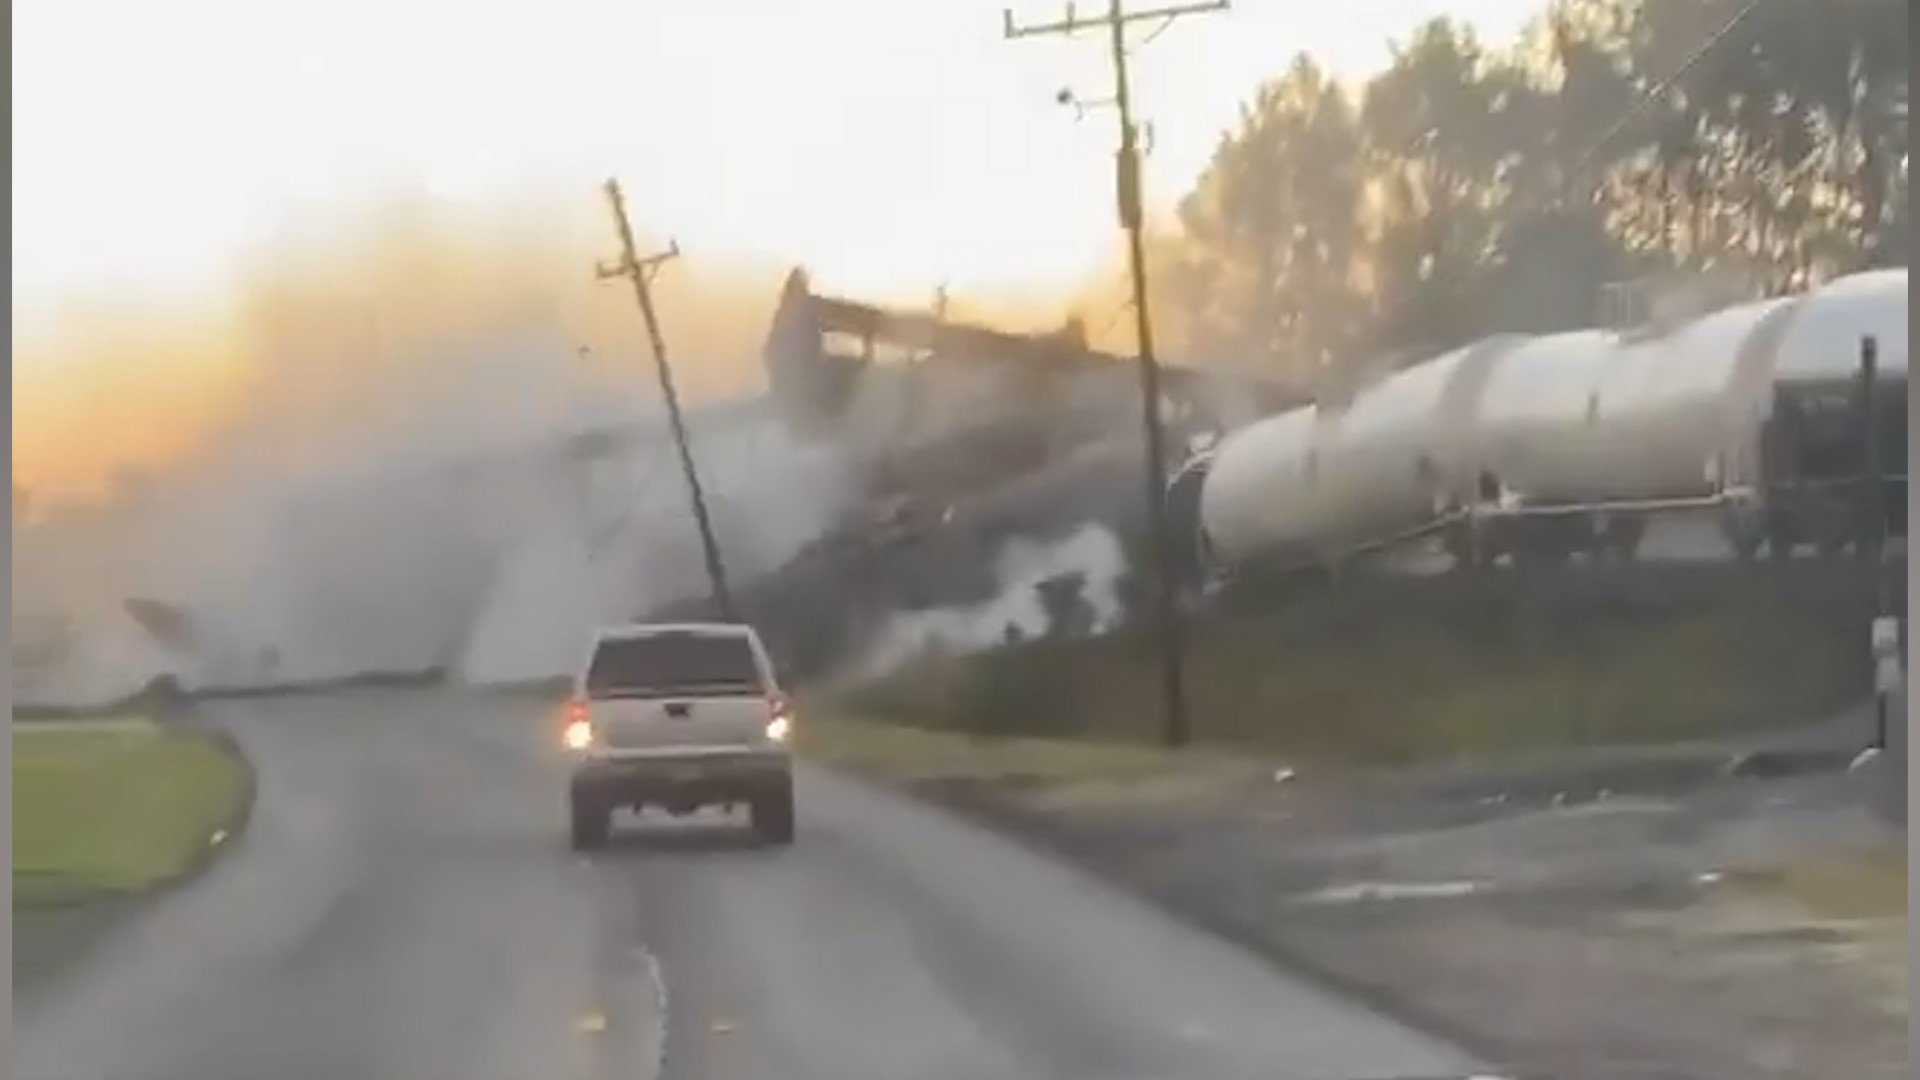 Witness video shows a train derailing, causing nearby evacuations, the morning of Oct. 29, 2020 north of Orange, Texas.